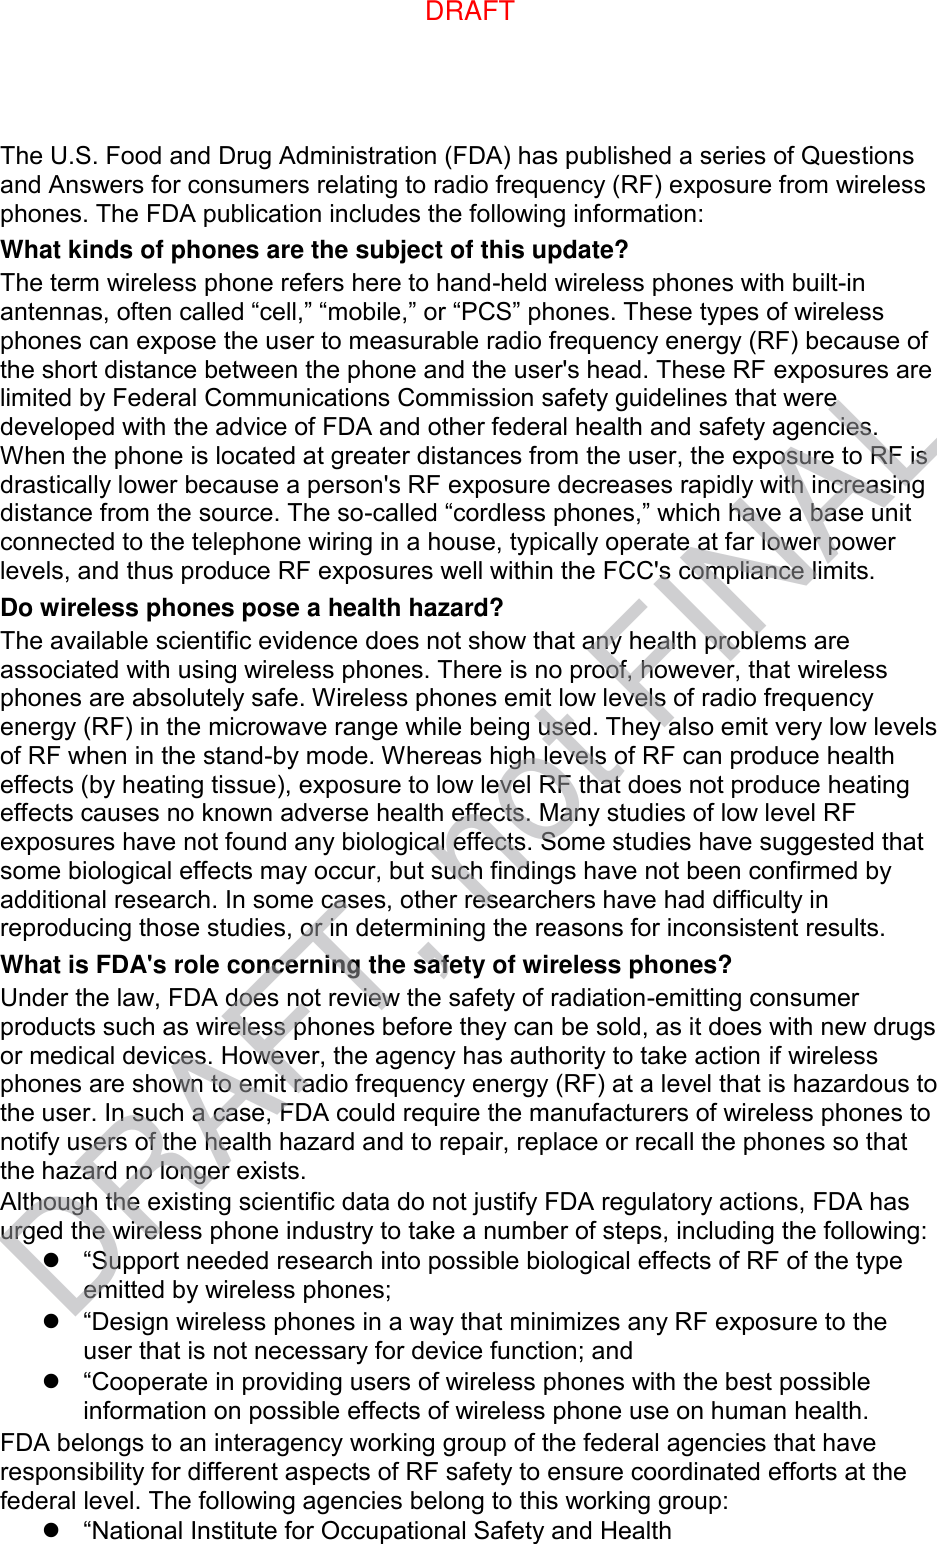 The U.S. Food and Drug Administration (FDA) has published a series of Questions and Answers for consumers relating to radio frequency (RF) exposure from wireless phones. The FDA publication includes the following information: What kinds of phones are the subject of this update? The term wireless phone refers here to hand-held wireless phones with built-in antennas, often called “cell,” “mobile,” or “PCS” phones. These types of wireless phones can expose the user to measurable radio frequency energy (RF) because of the short distance between the phone and the user&apos;s head. These RF exposures are limited by Federal Communications Commission safety guidelines that were developed with the advice of FDA and other federal health and safety agencies. When the phone is located at greater distances from the user, the exposure to RF is drastically lower because a person&apos;s RF exposure decreases rapidly with increasing distance from the source. The so-called “cordless phones,” which have a base unit connected to the telephone wiring in a house, typically operate at far lower power levels, and thus produce RF exposures well within the FCC&apos;s compliance limits. Do wireless phones pose a health hazard? The available scientific evidence does not show that any health problems are associated with using wireless phones. There is no proof, however, that wireless phones are absolutely safe. Wireless phones emit low levels of radio frequency energy (RF) in the microwave range while being used. They also emit very low levels of RF when in the stand-by mode. Whereas high levels of RF can produce health effects (by heating tissue), exposure to low level RF that does not produce heating effects causes no known adverse health effects. Many studies of low level RF exposures have not found any biological effects. Some studies have suggested that some biological effects may occur, but such findings have not been confirmed by additional research. In some cases, other researchers have had difficulty in reproducing those studies, or in determining the reasons for inconsistent results. What is FDA&apos;s role concerning the safety of wireless phones? Under the law, FDA does not review the safety of radiation-emitting consumer products such as wireless phones before they can be sold, as it does with new drugs or medical devices. However, the agency has authority to take action if wireless phones are shown to emit radio frequency energy (RF) at a level that is hazardous to the user. In such a case, FDA could require the manufacturers of wireless phones to notify users of the health hazard and to repair, replace or recall the phones so that the hazard no longer exists. Although the existing scientific data do not justify FDA regulatory actions, FDA has urged the wireless phone industry to take a number of steps, including the following:  “Support needed research into possible biological effects of RF of the type emitted by wireless phones;  “Design wireless phones in a way that minimizes any RF exposure to the user that is not necessary for device function; and  “Cooperate in providing users of wireless phones with the best possible information on possible effects of wireless phone use on human health. FDA belongs to an interagency working group of the federal agencies that have responsibility for different aspects of RF safety to ensure coordinated efforts at the federal level. The following agencies belong to this working group:  “National Institute for Occupational Safety and Health DRAFTDRAFT, not FINAL